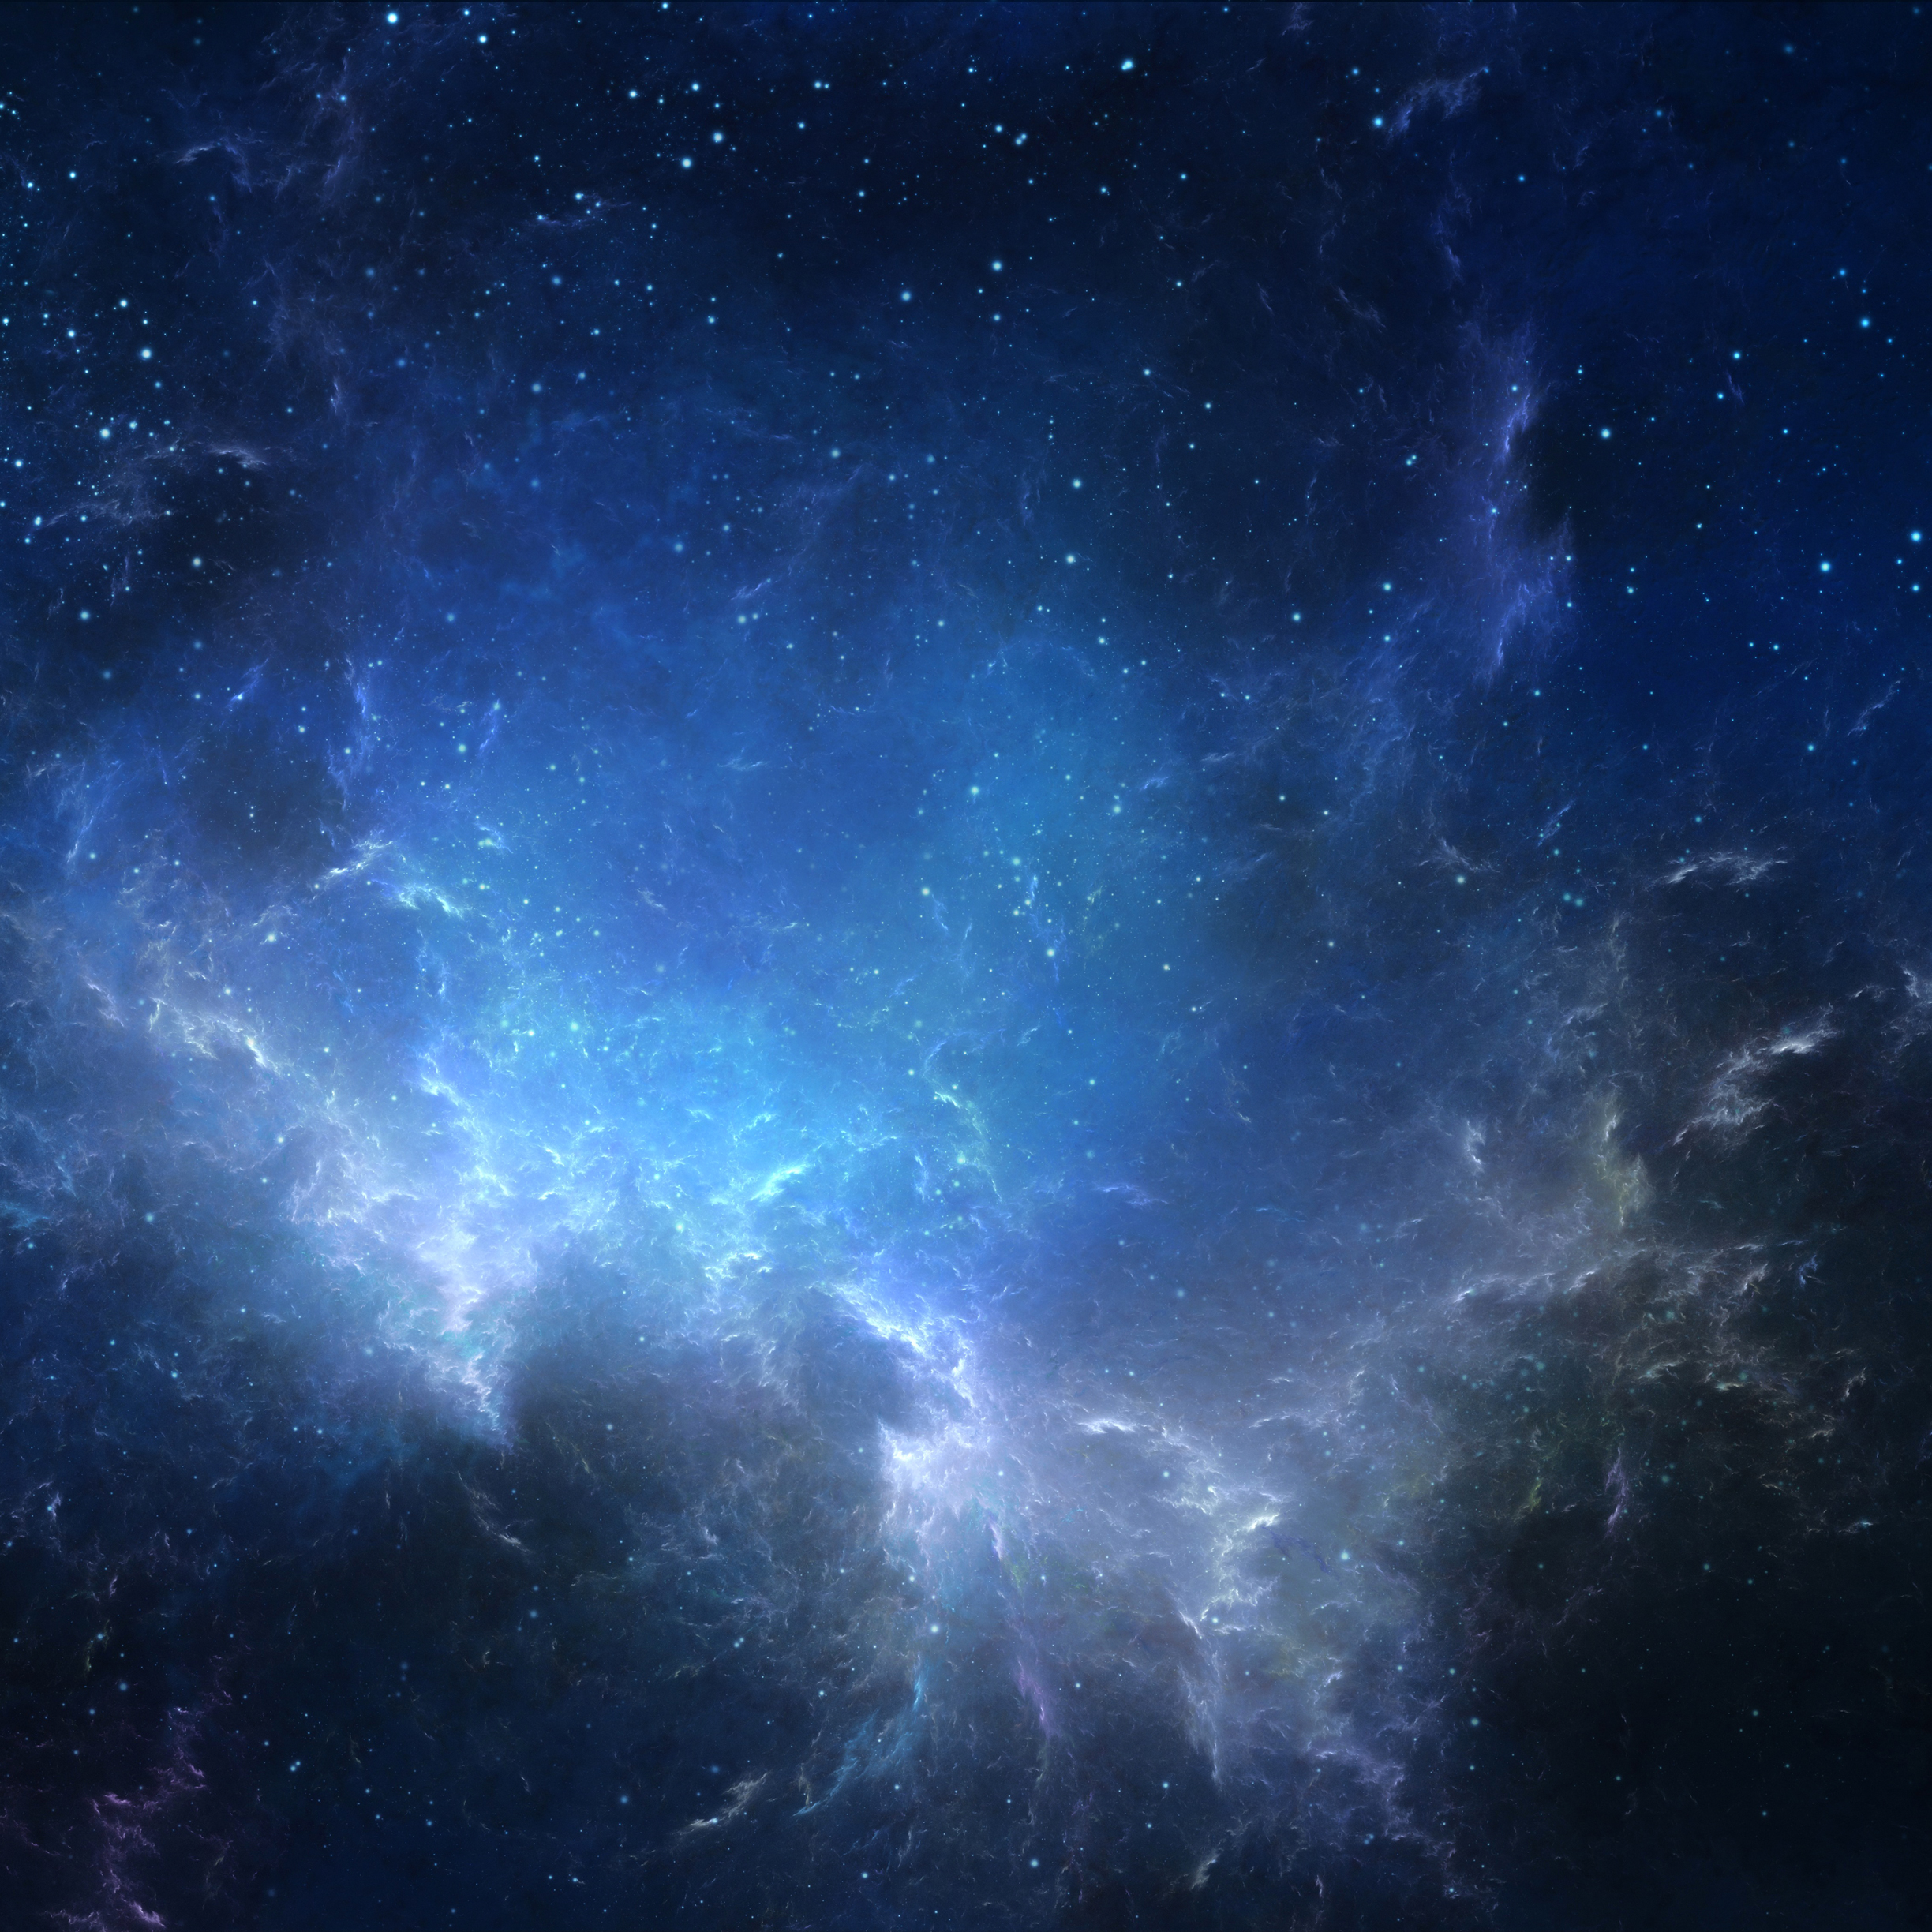 Blue Space Parallax Wallpaper for iPhone Pro Max, X, 6